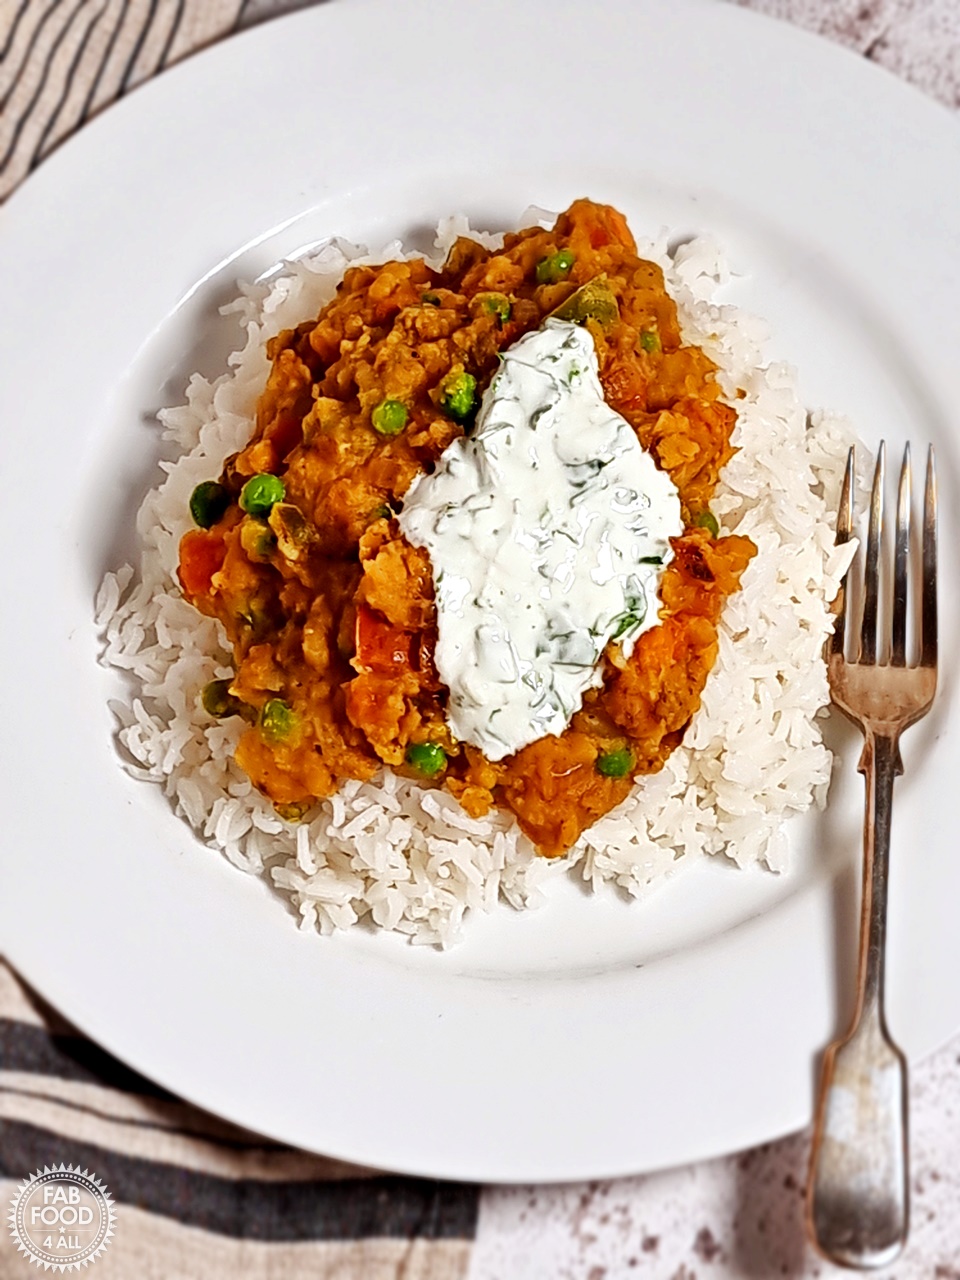 Vegetable Dhal Curry with rice & garnished with coriander yogurt dressing.